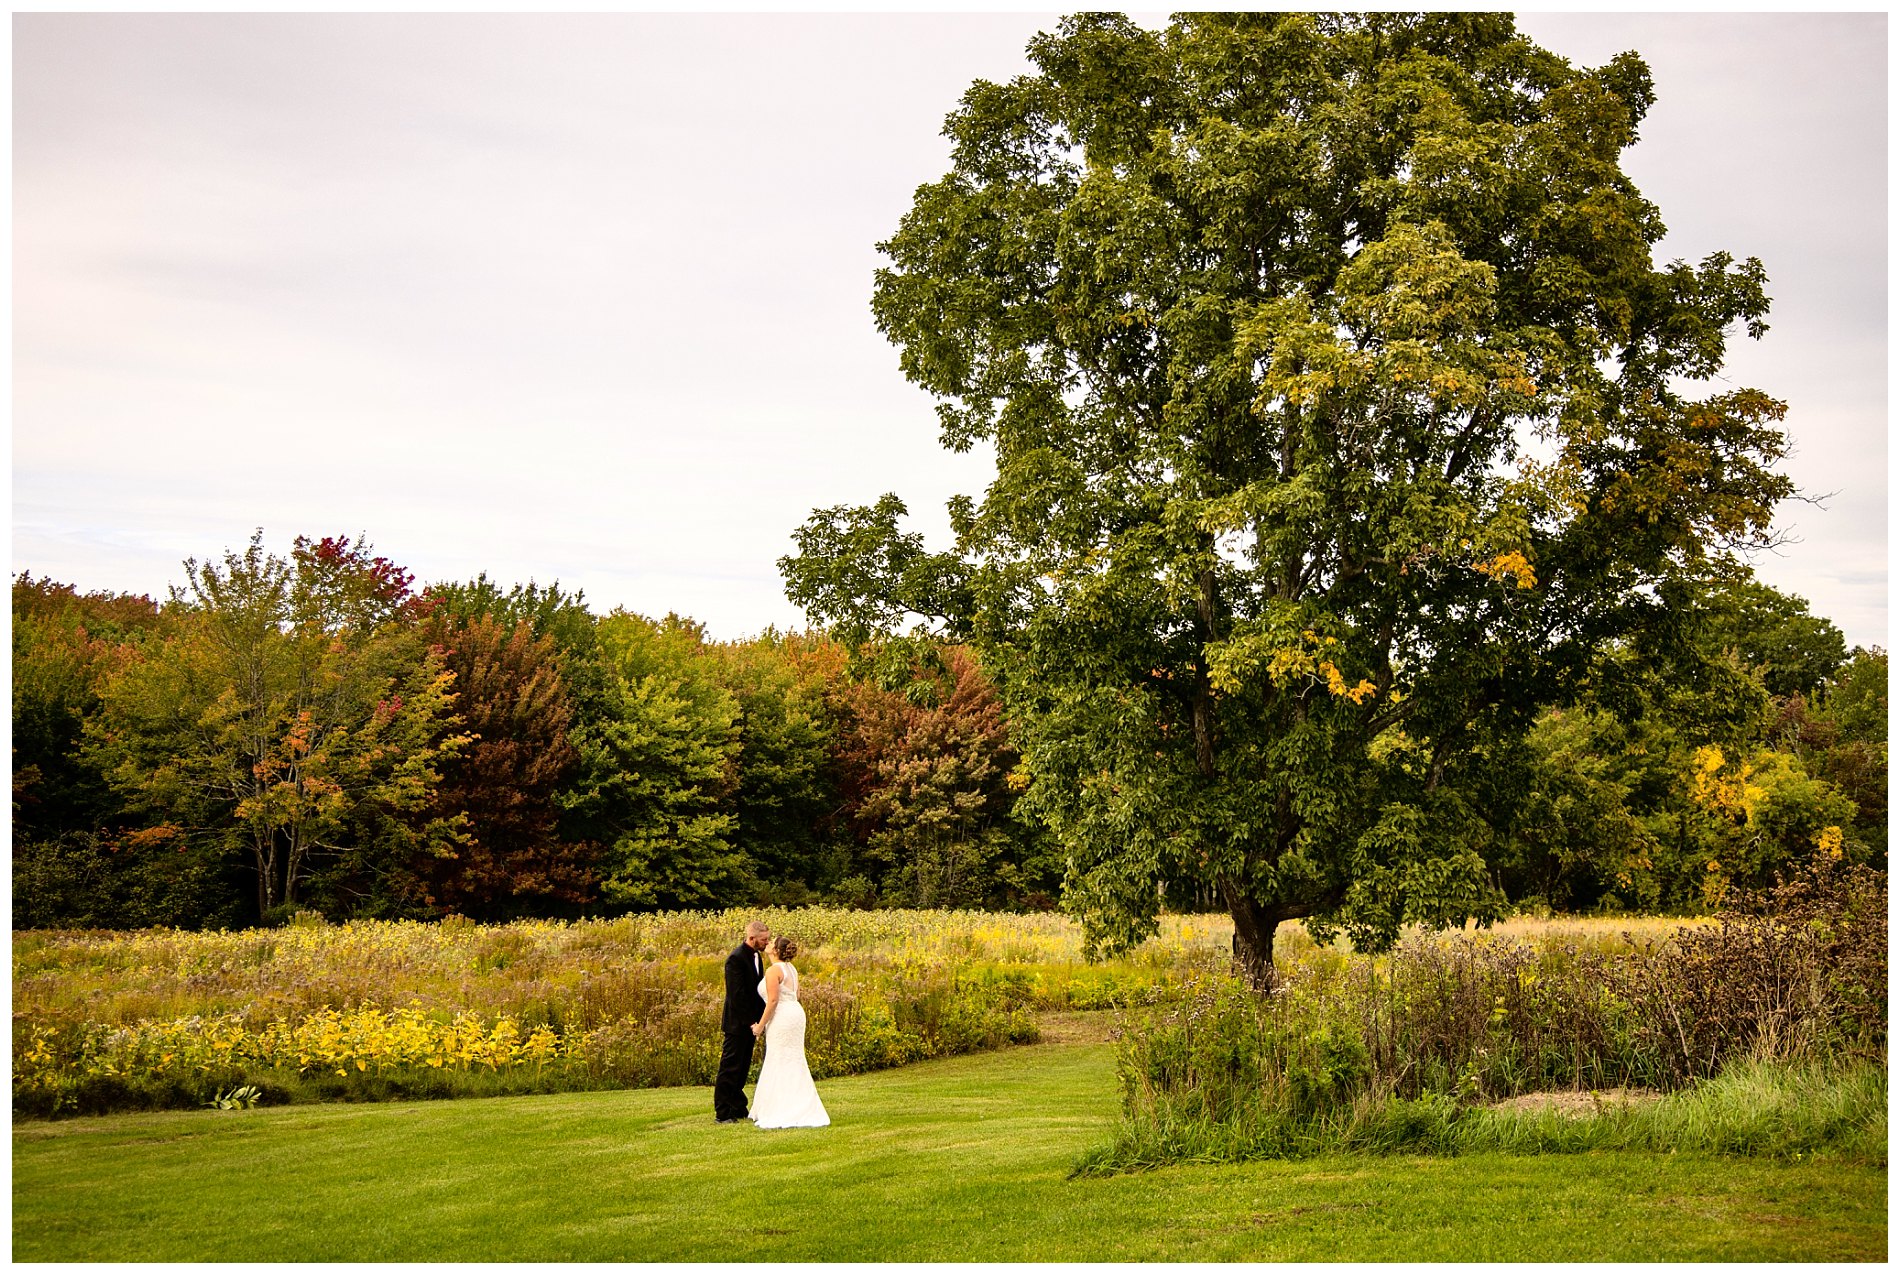 fall colors are the background for wedding pictures in wells, me